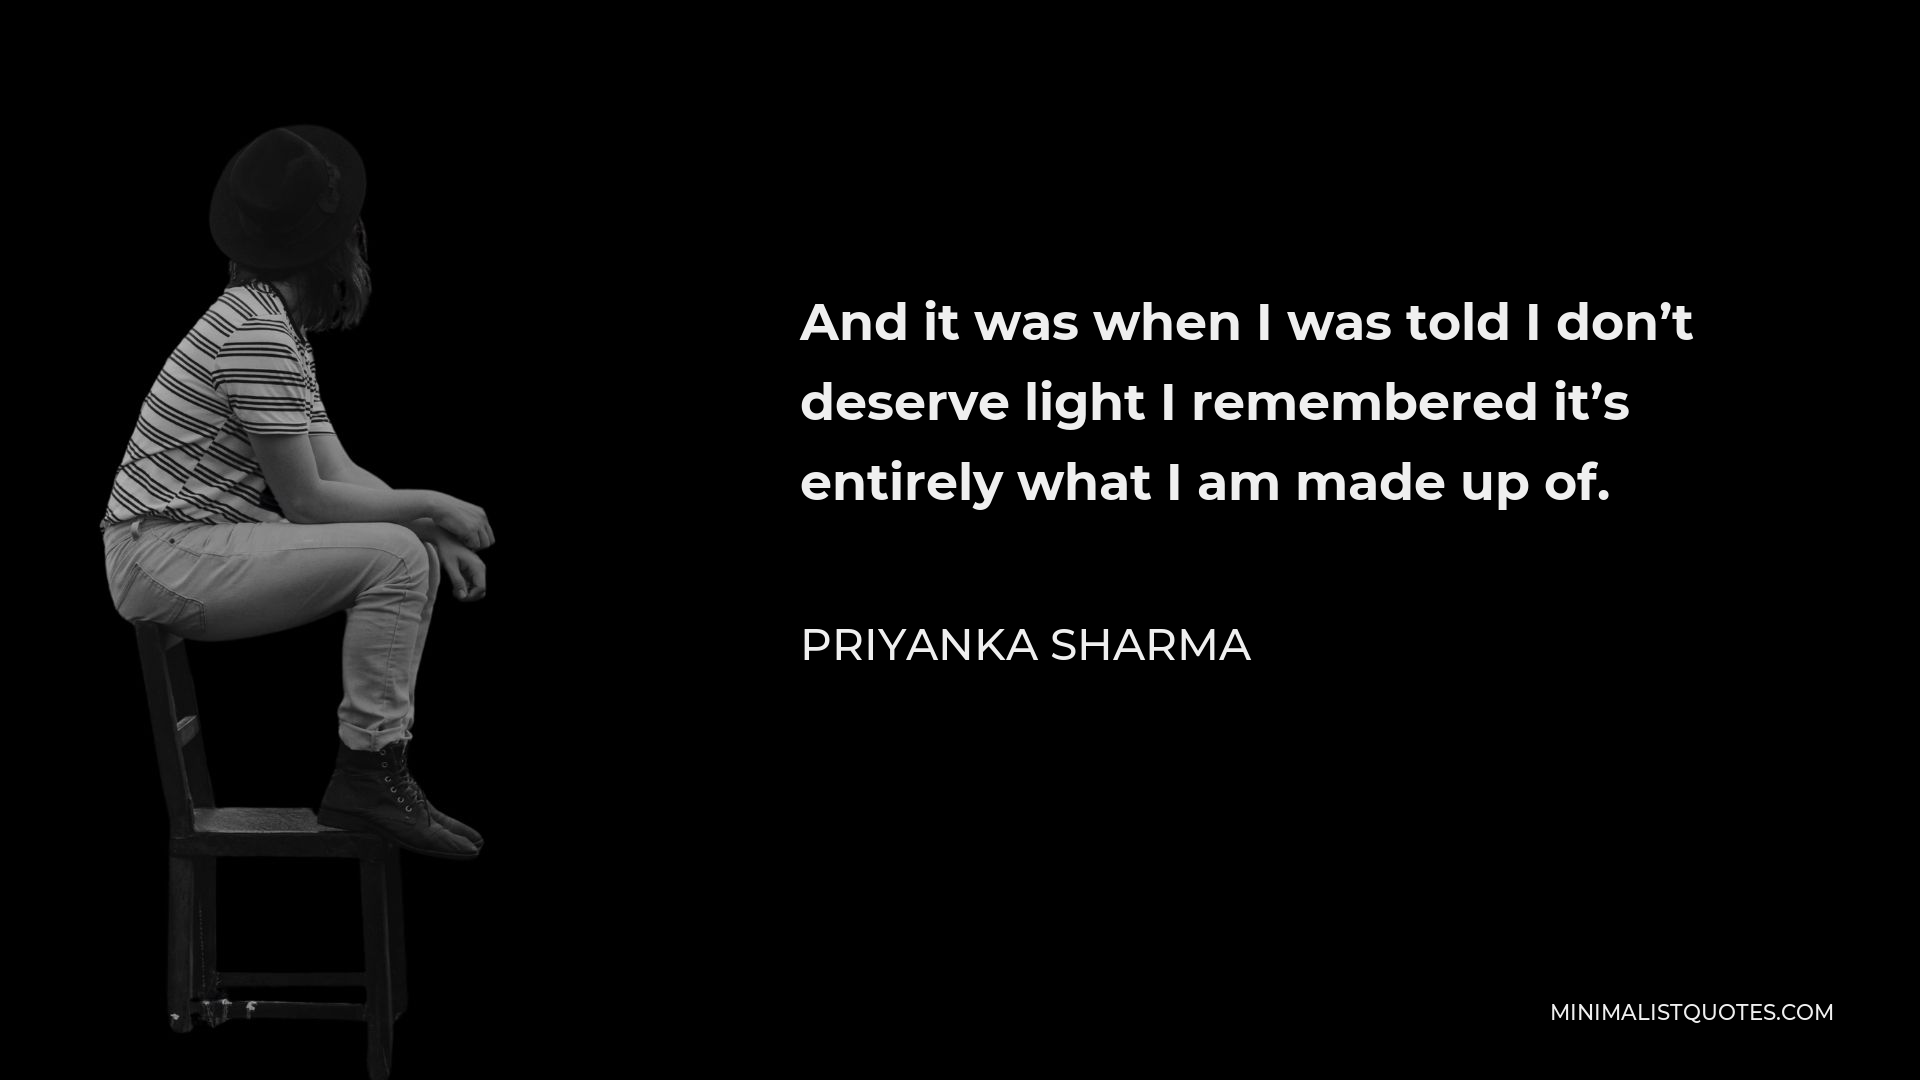 Priyanka Sharma Quote - And it was when I was told I don’t deserve light I remembered it’s entirely what I am made up of.